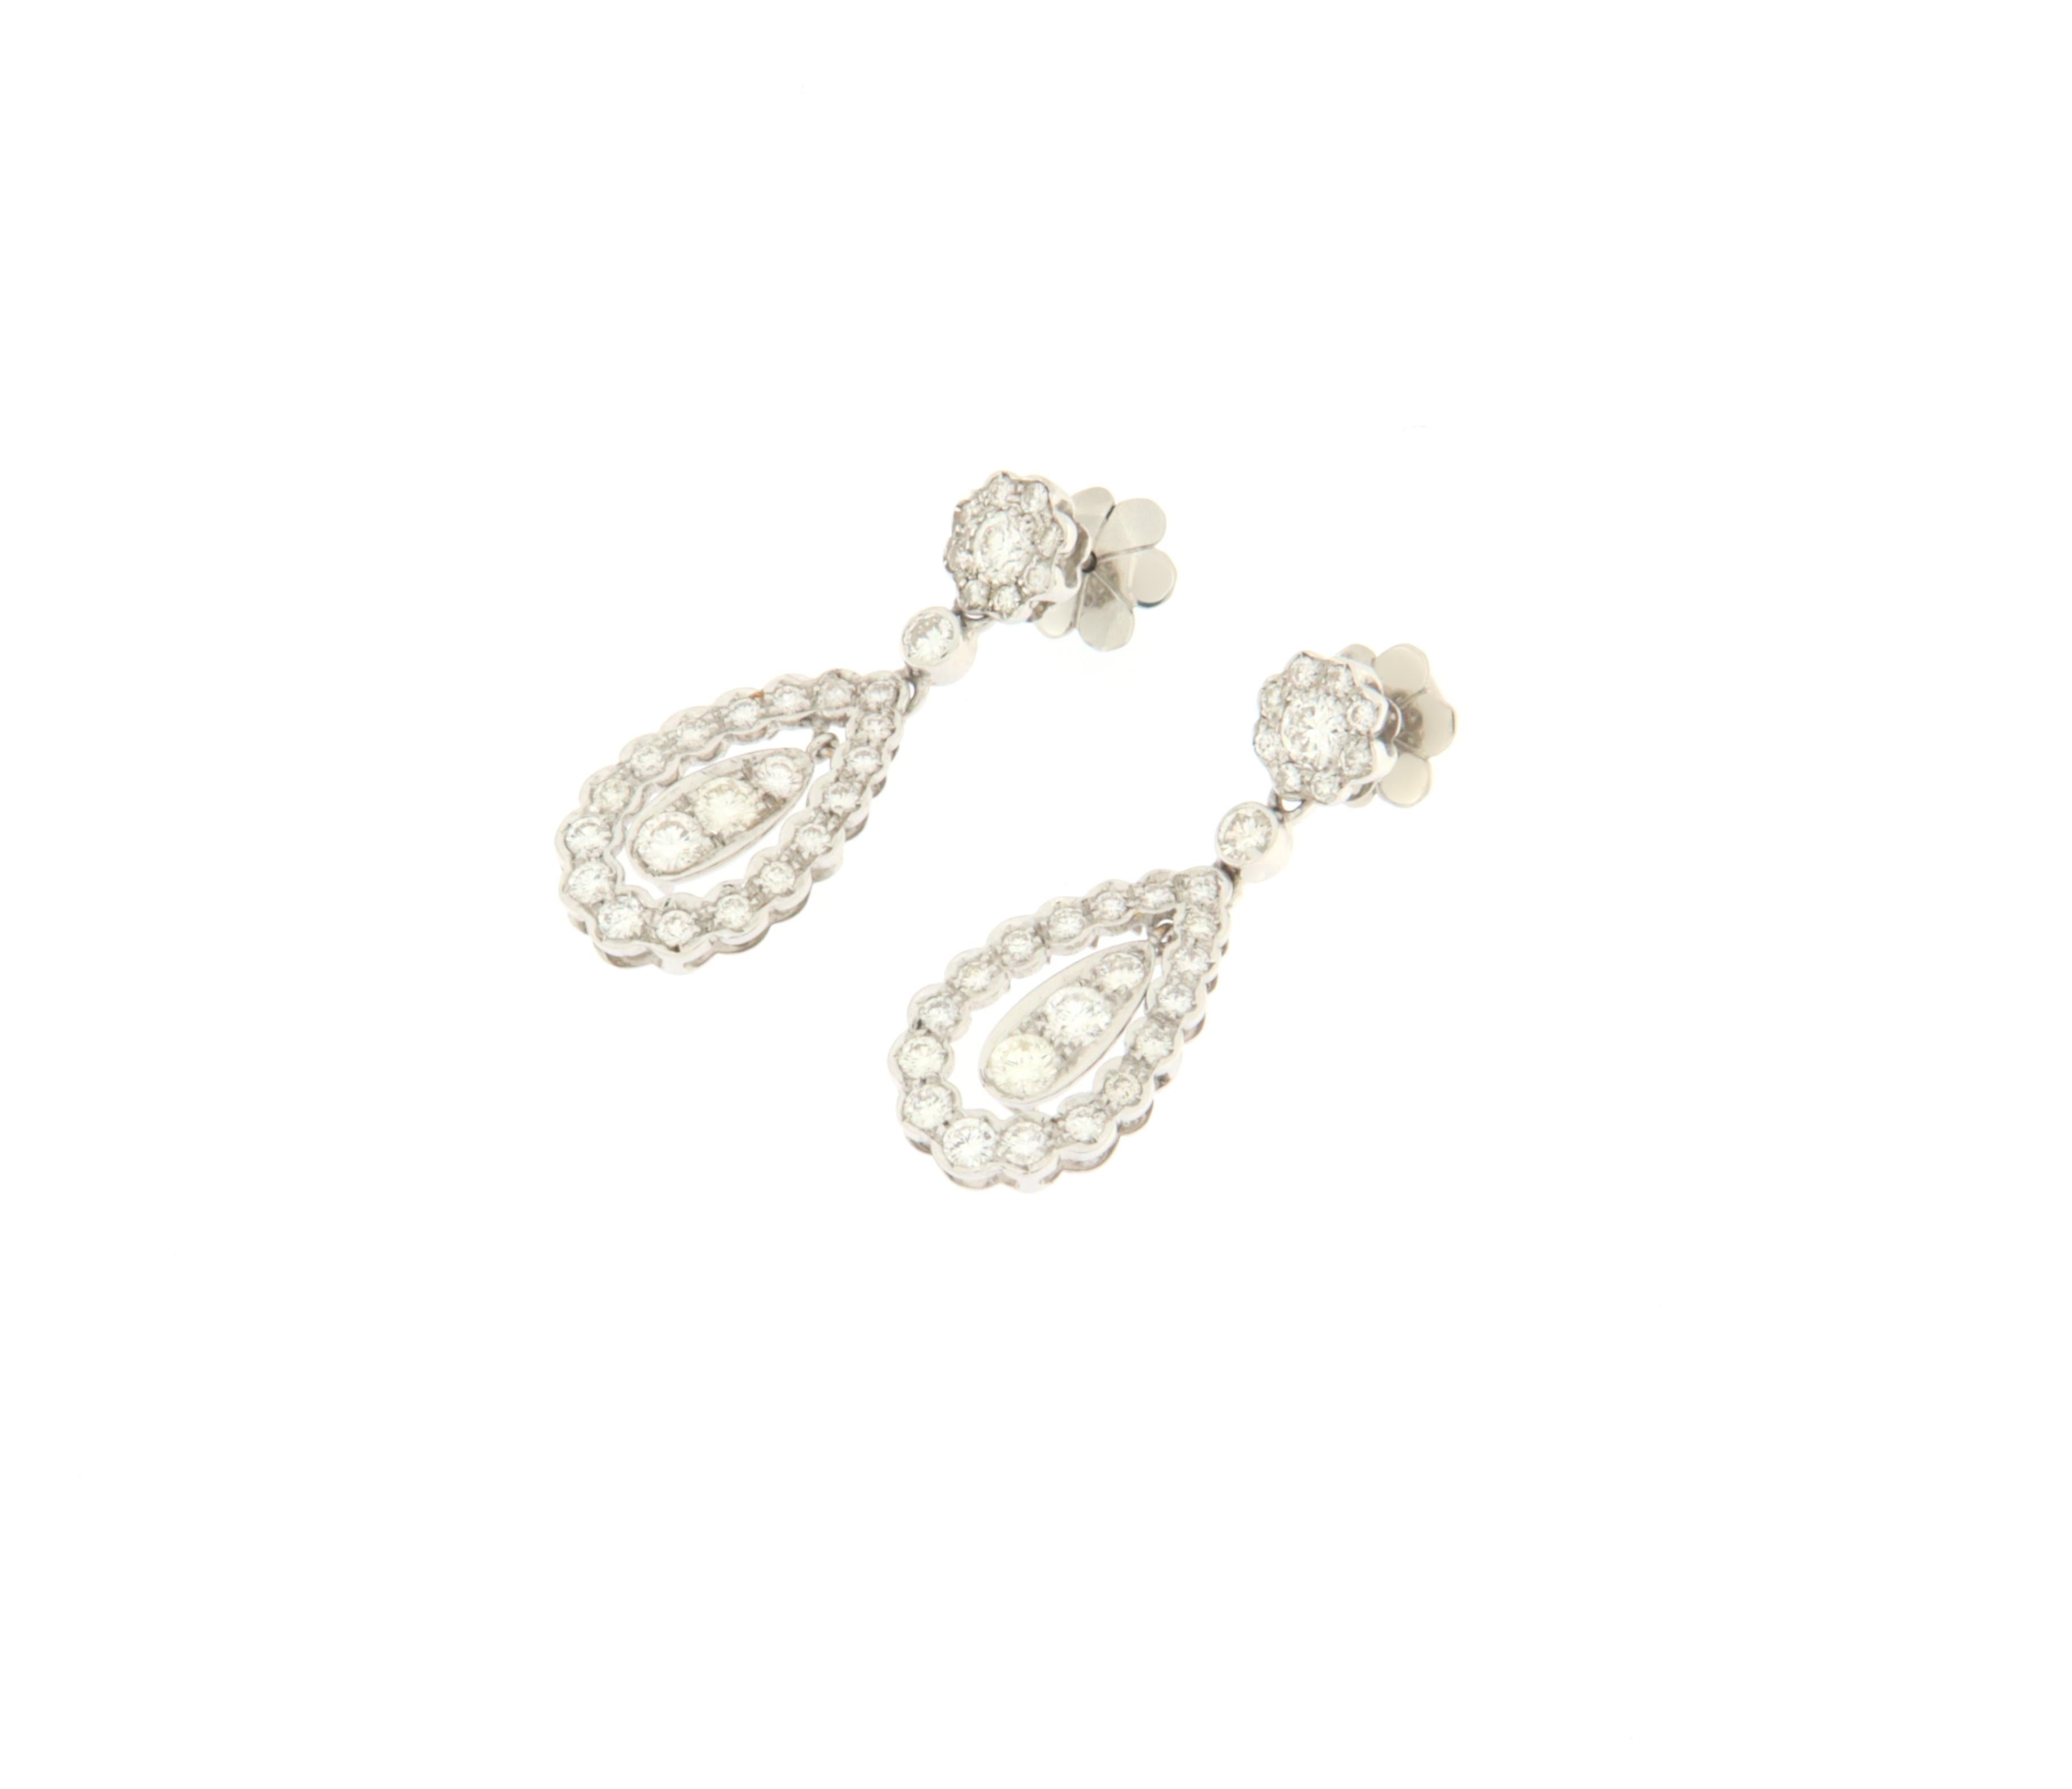 Delicious drop-shaped earring made entirely by hand. In the upper part a small plane depicting a daisy supports two drops, inside the larger drop there is a small mobile drop. On the earrings made of 18K white gold there are natural diamonds of